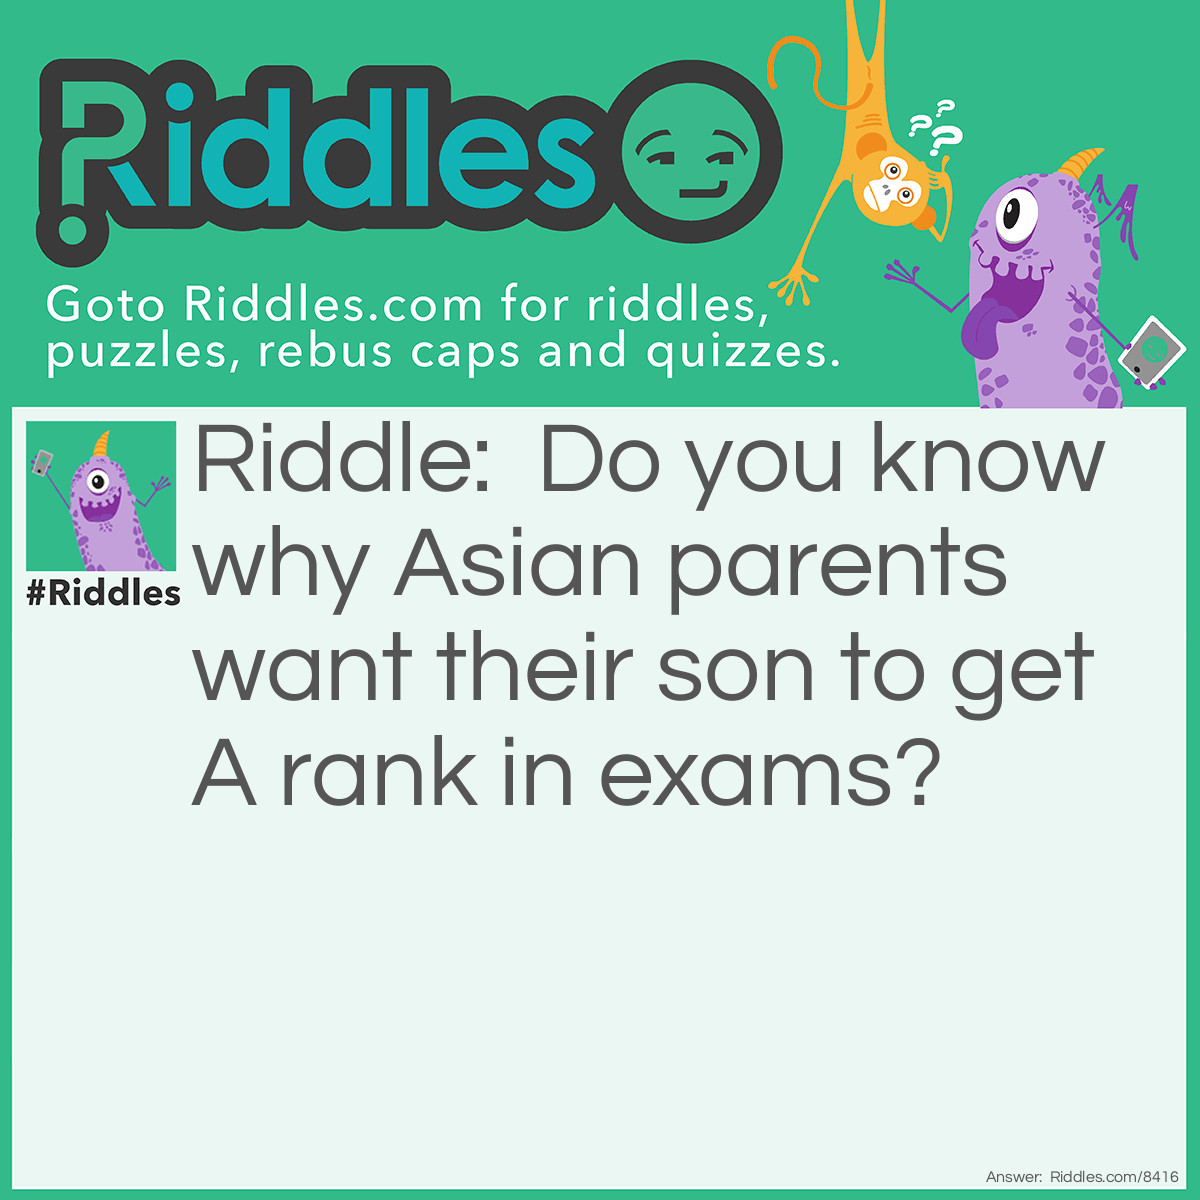 Riddle: Do you know why Asian parents want their son to get A rank in exams? Answer: Asian is A-sian, so if Asian parents found out their son got B or C in exams, it will be B-sian or C-sian, which makes no sense.